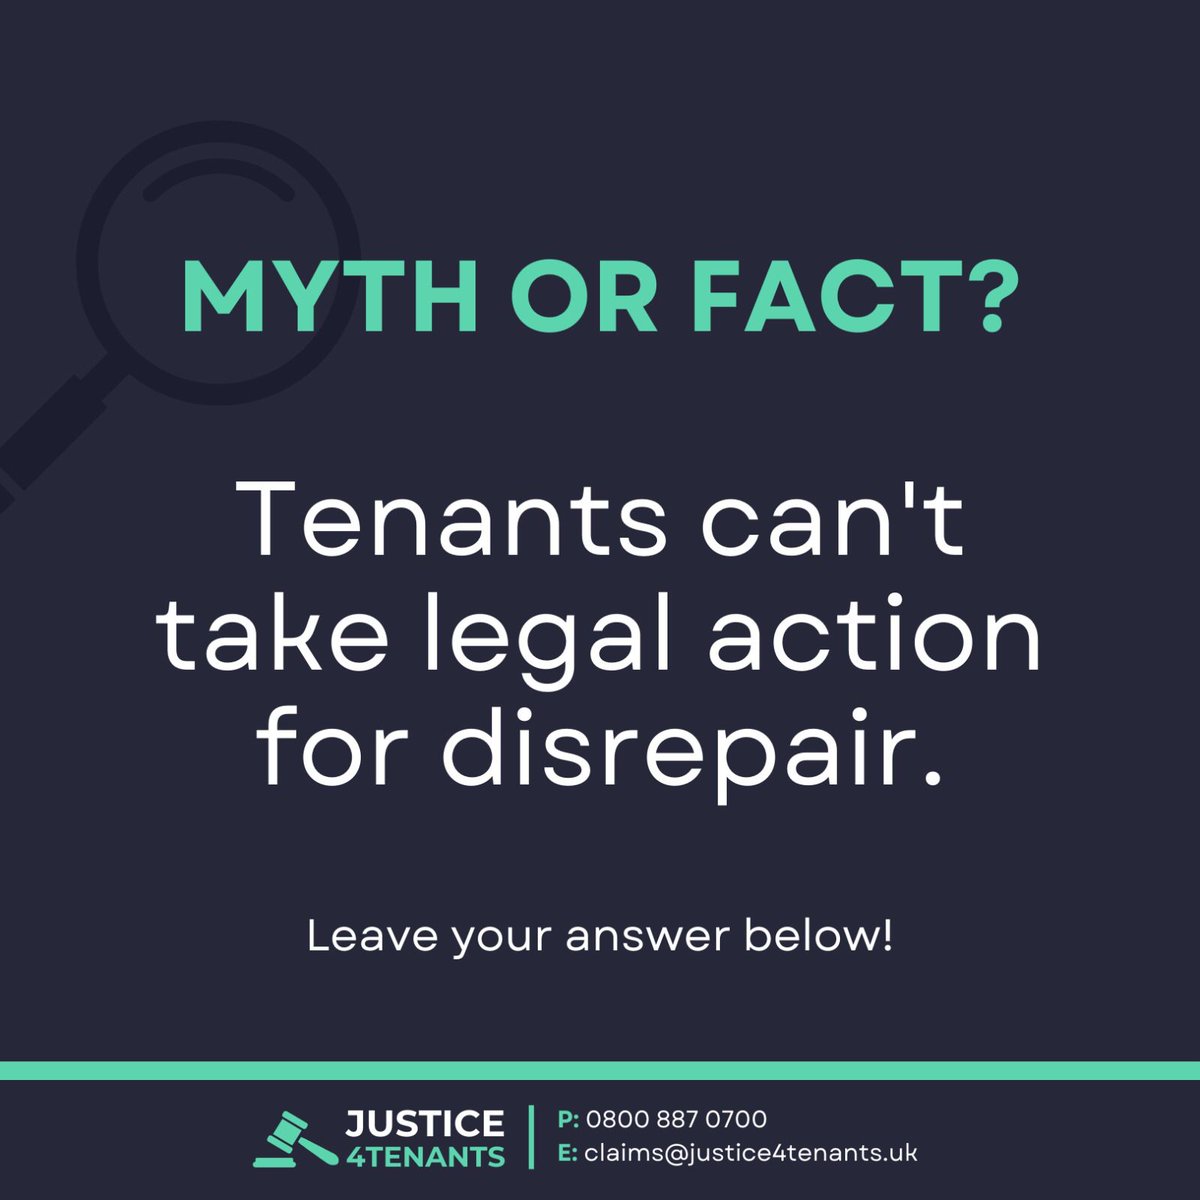 If your rental home has serious issues, you can take action to ensure it's fixed. 

Contact us toll-free today at 0800 887 0700 or email us at claims@justice4tenants.uk

#HousingDisrepair #Just4Tenants #UKHousing #UKRenting #RentingInUK #TenantUK #HousingUK #UKProperty